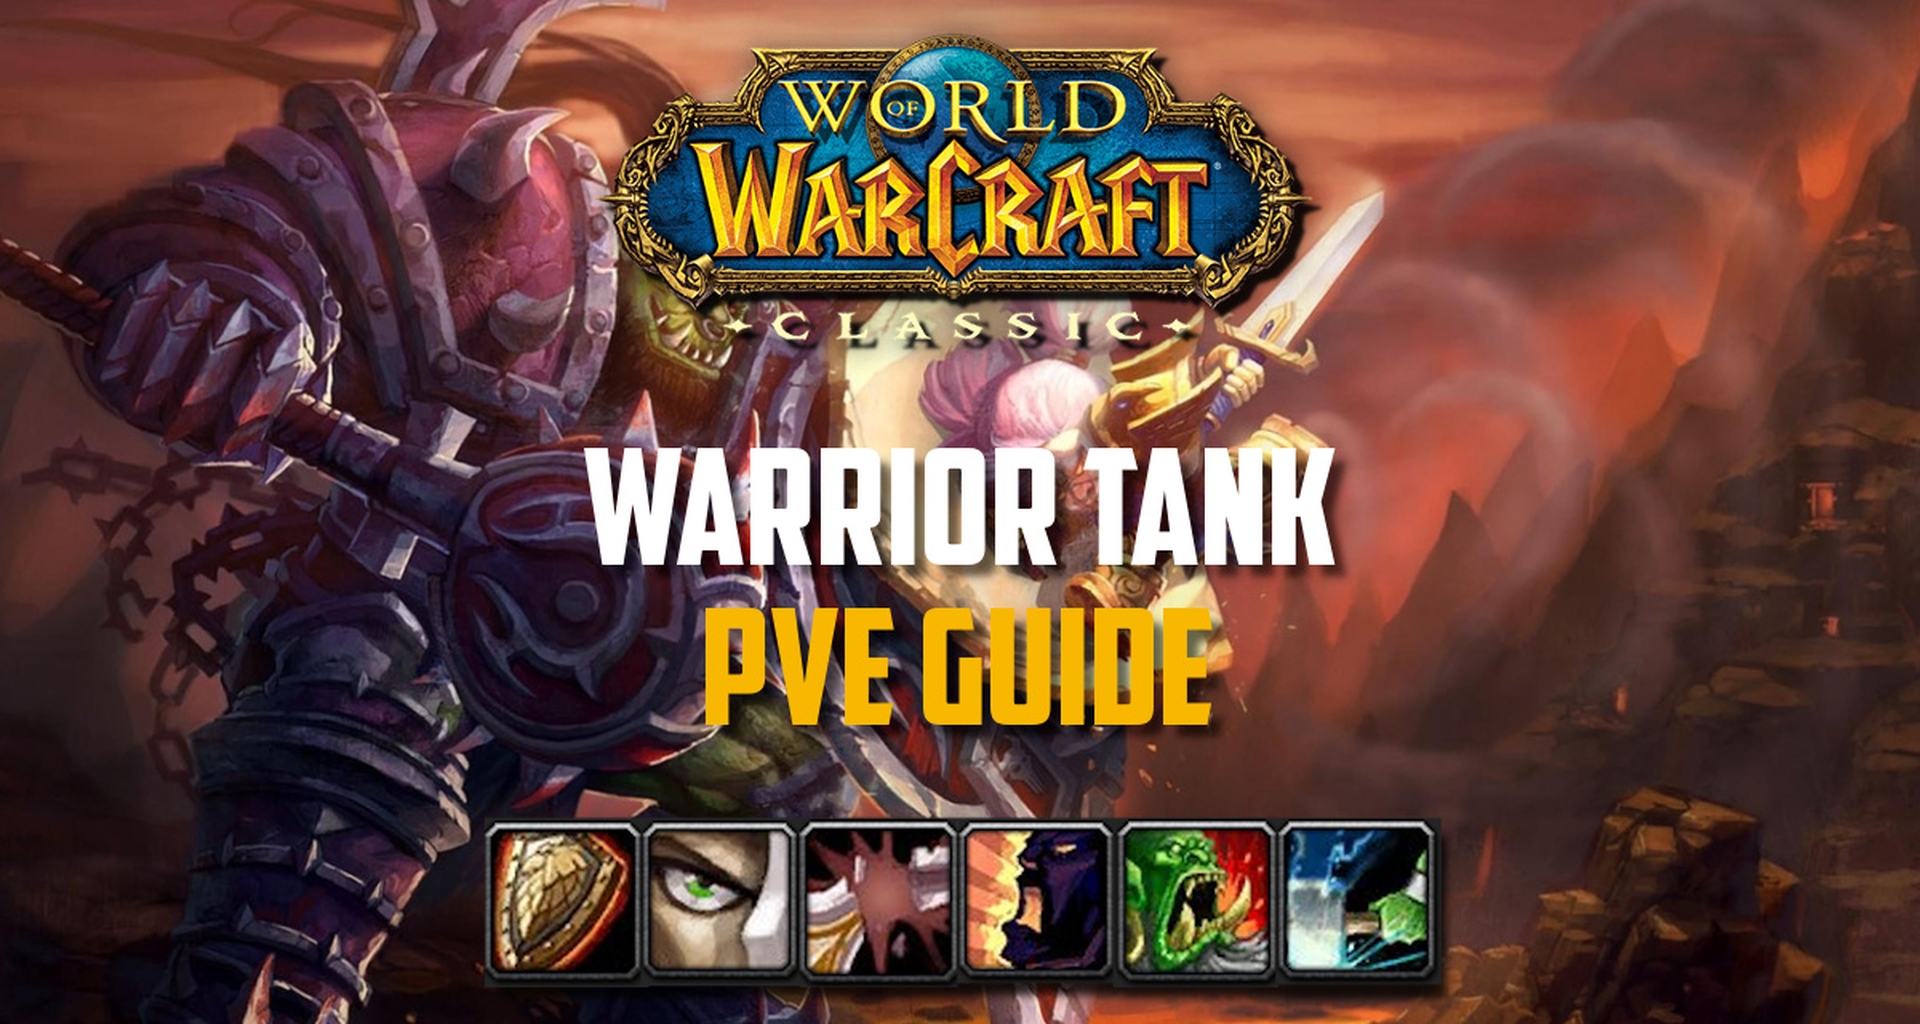 Protection Warrior Pve Guide Spec Rotation Macros Bis Gear